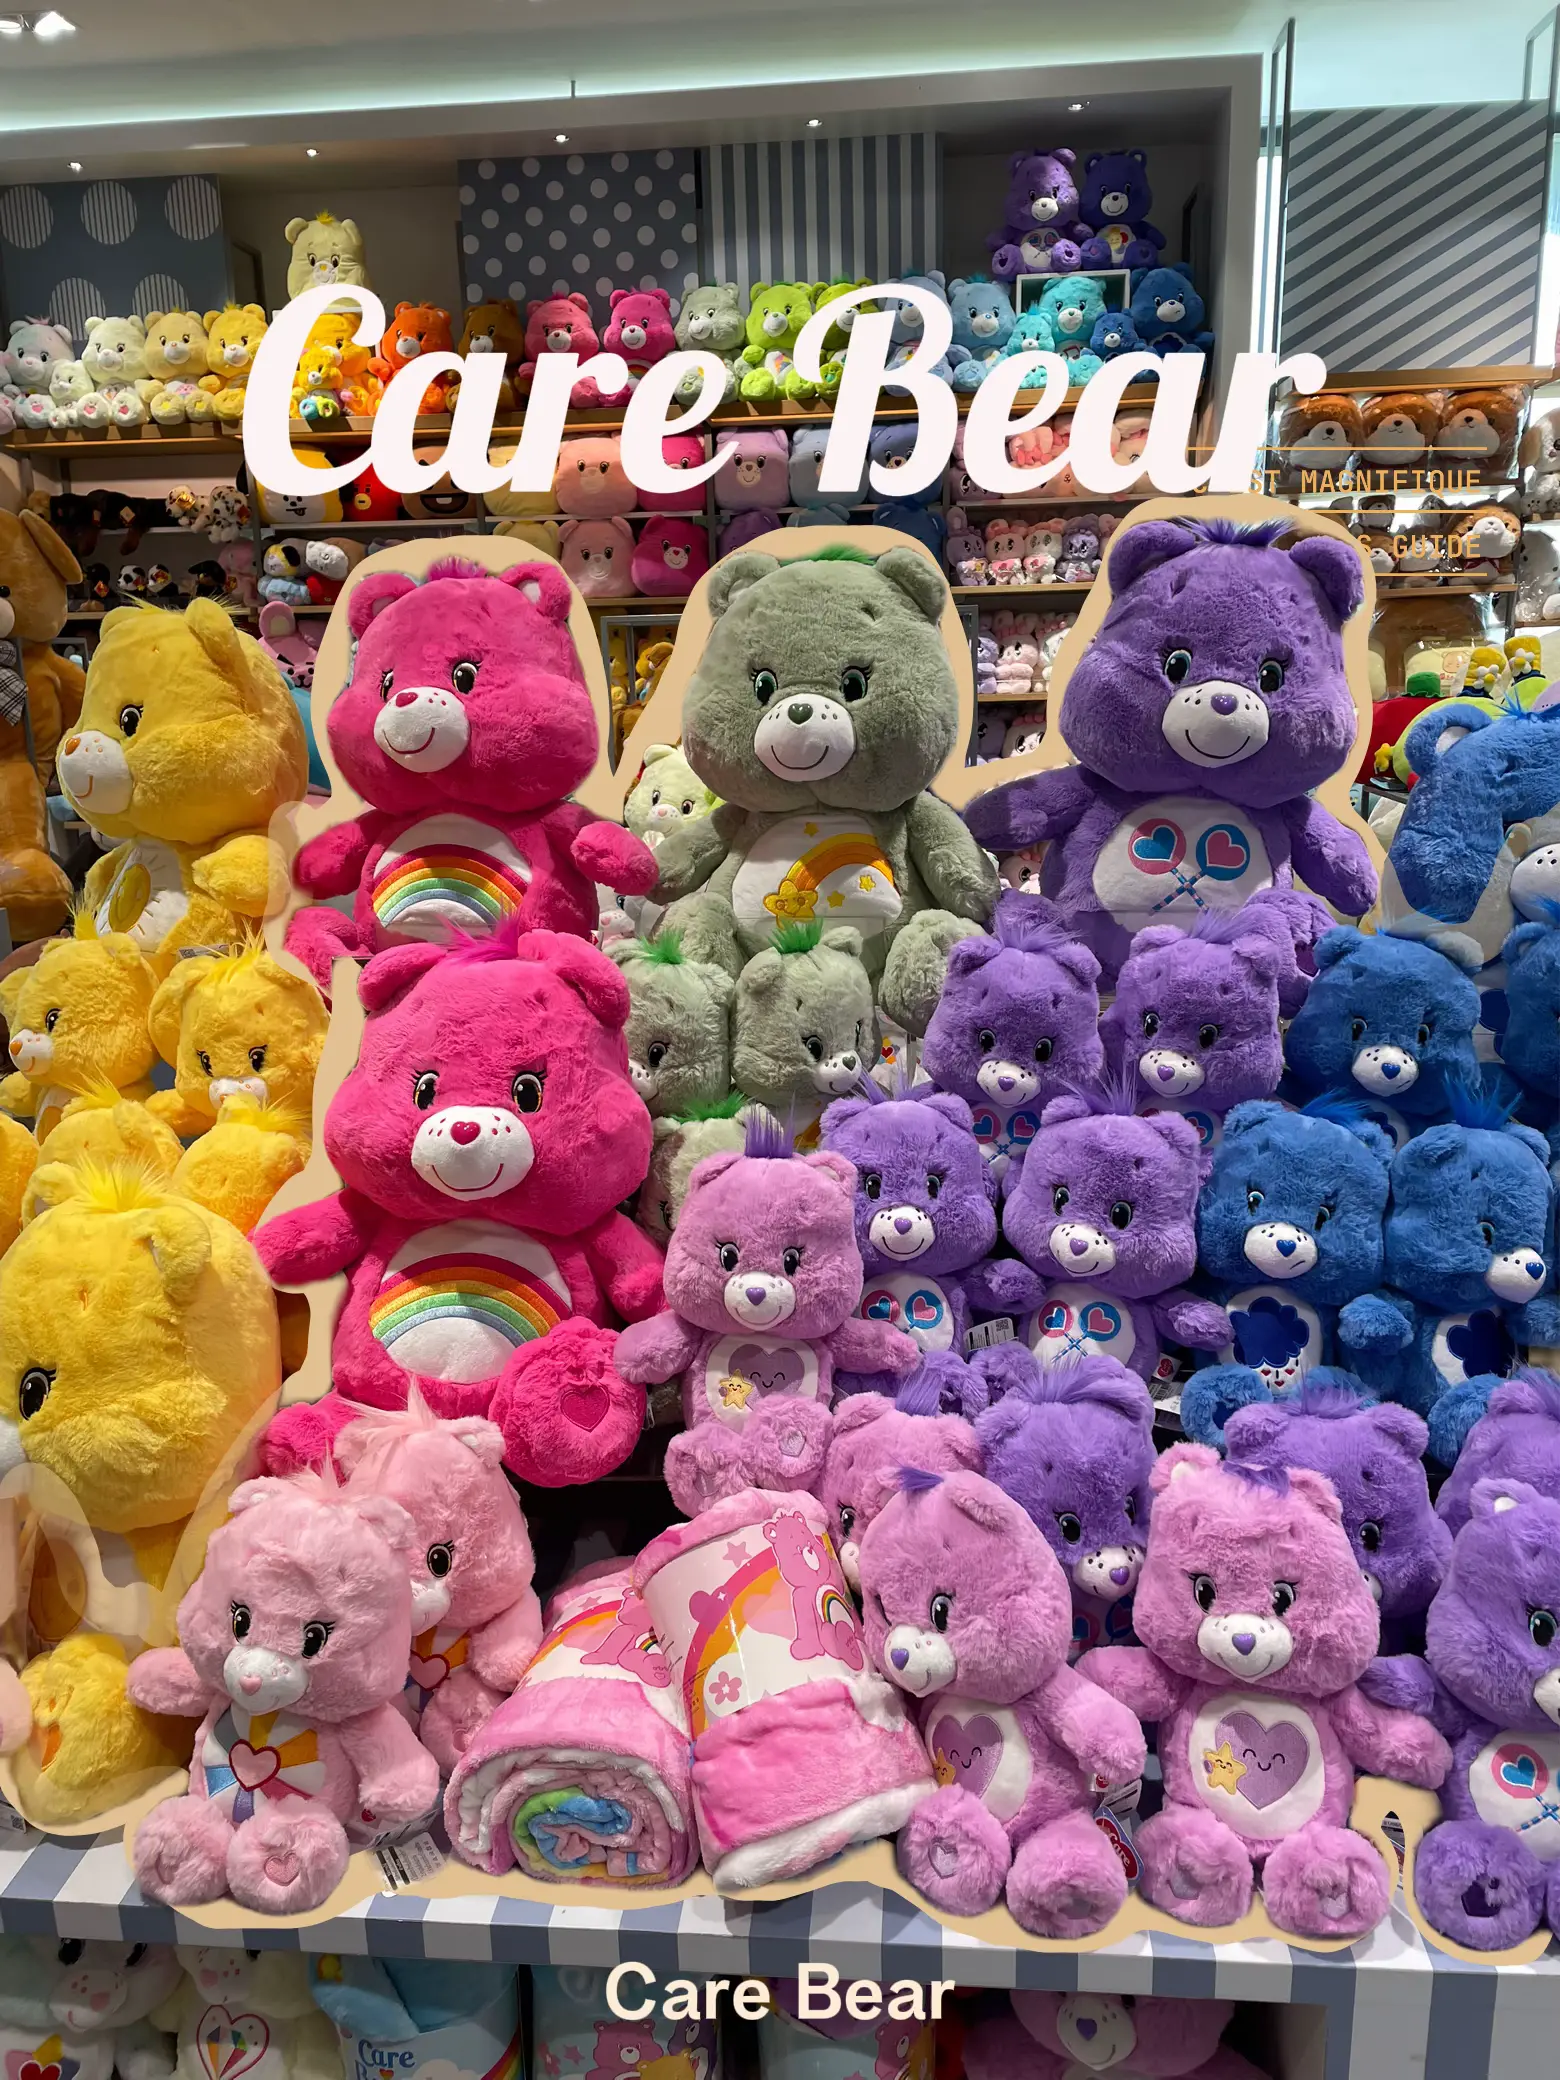 CARE BEARS COLLECTION – Preppy Pop®